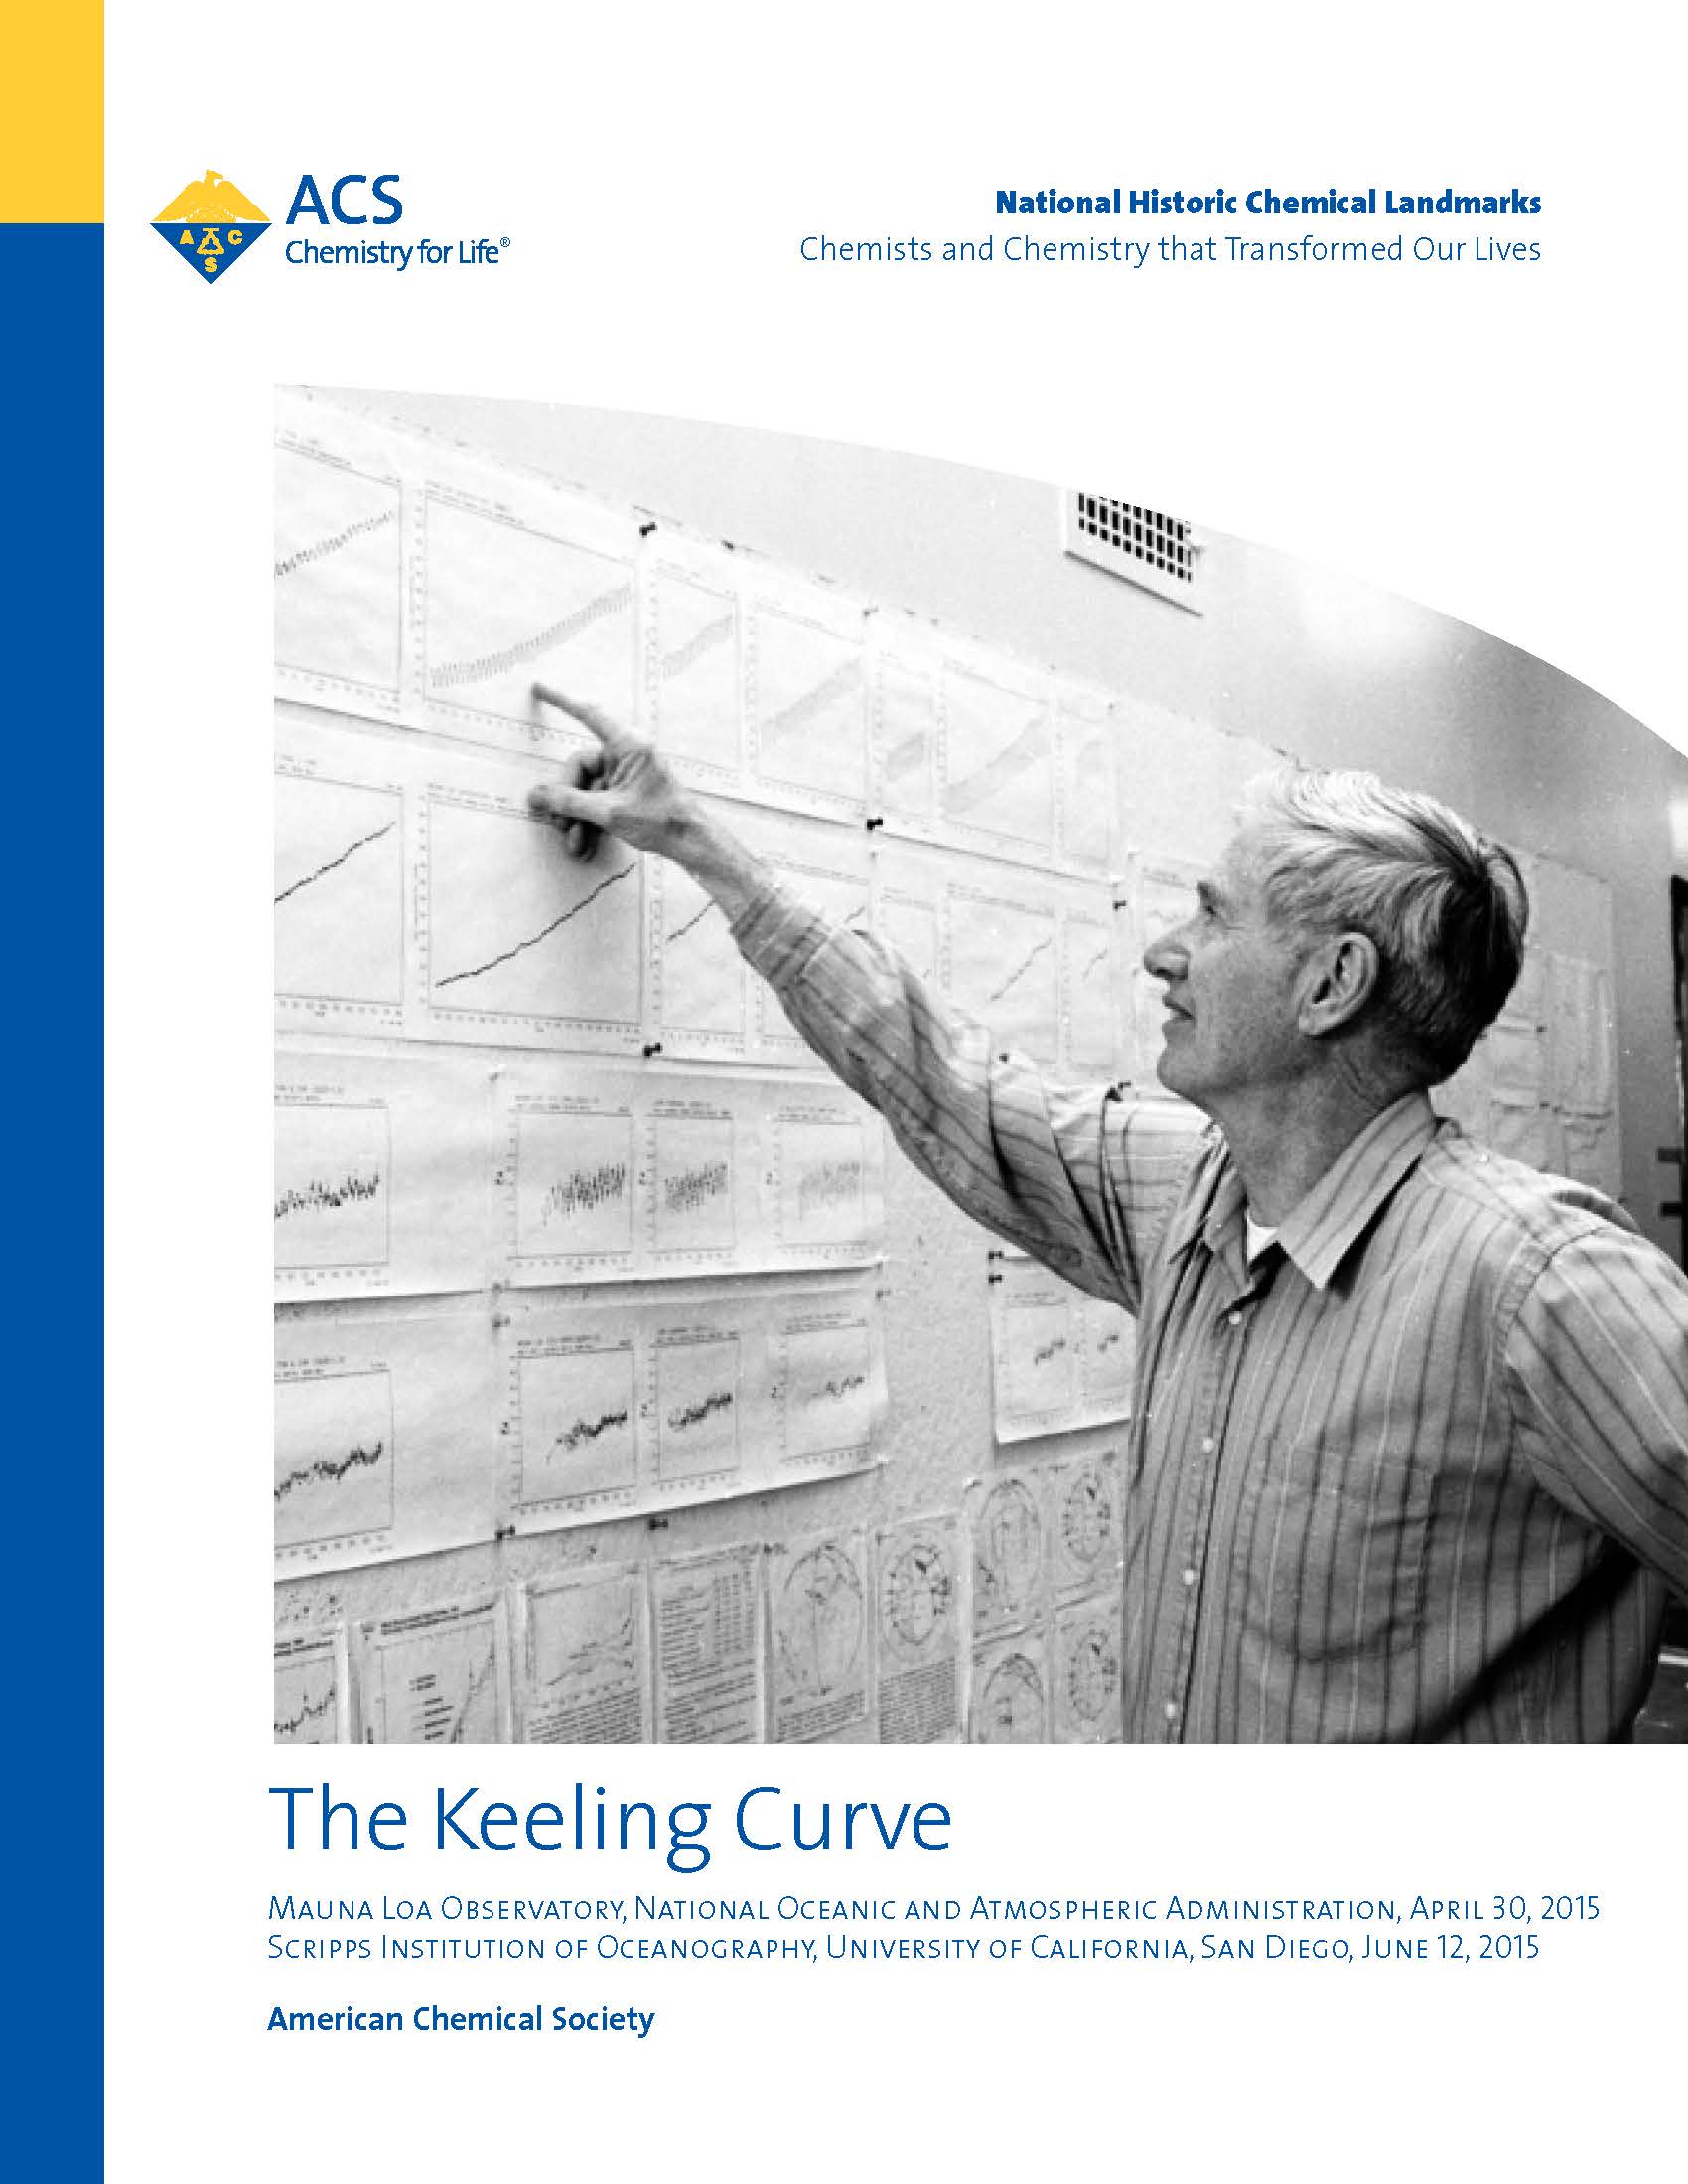 "The Keeling Curve" booklet